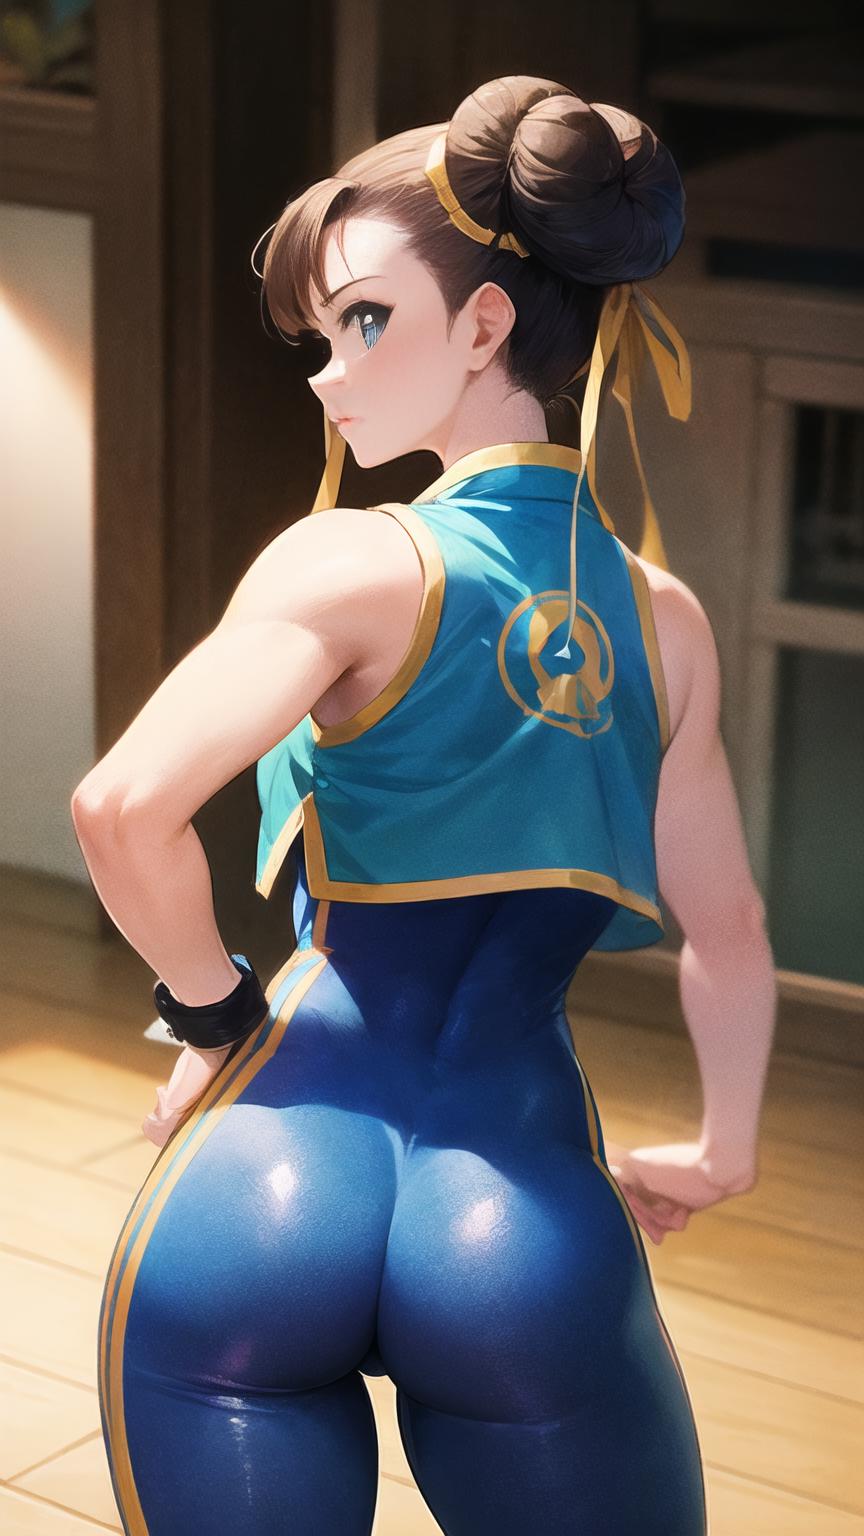 A woman with an anime style outfit that has a blue top and yellow bow.